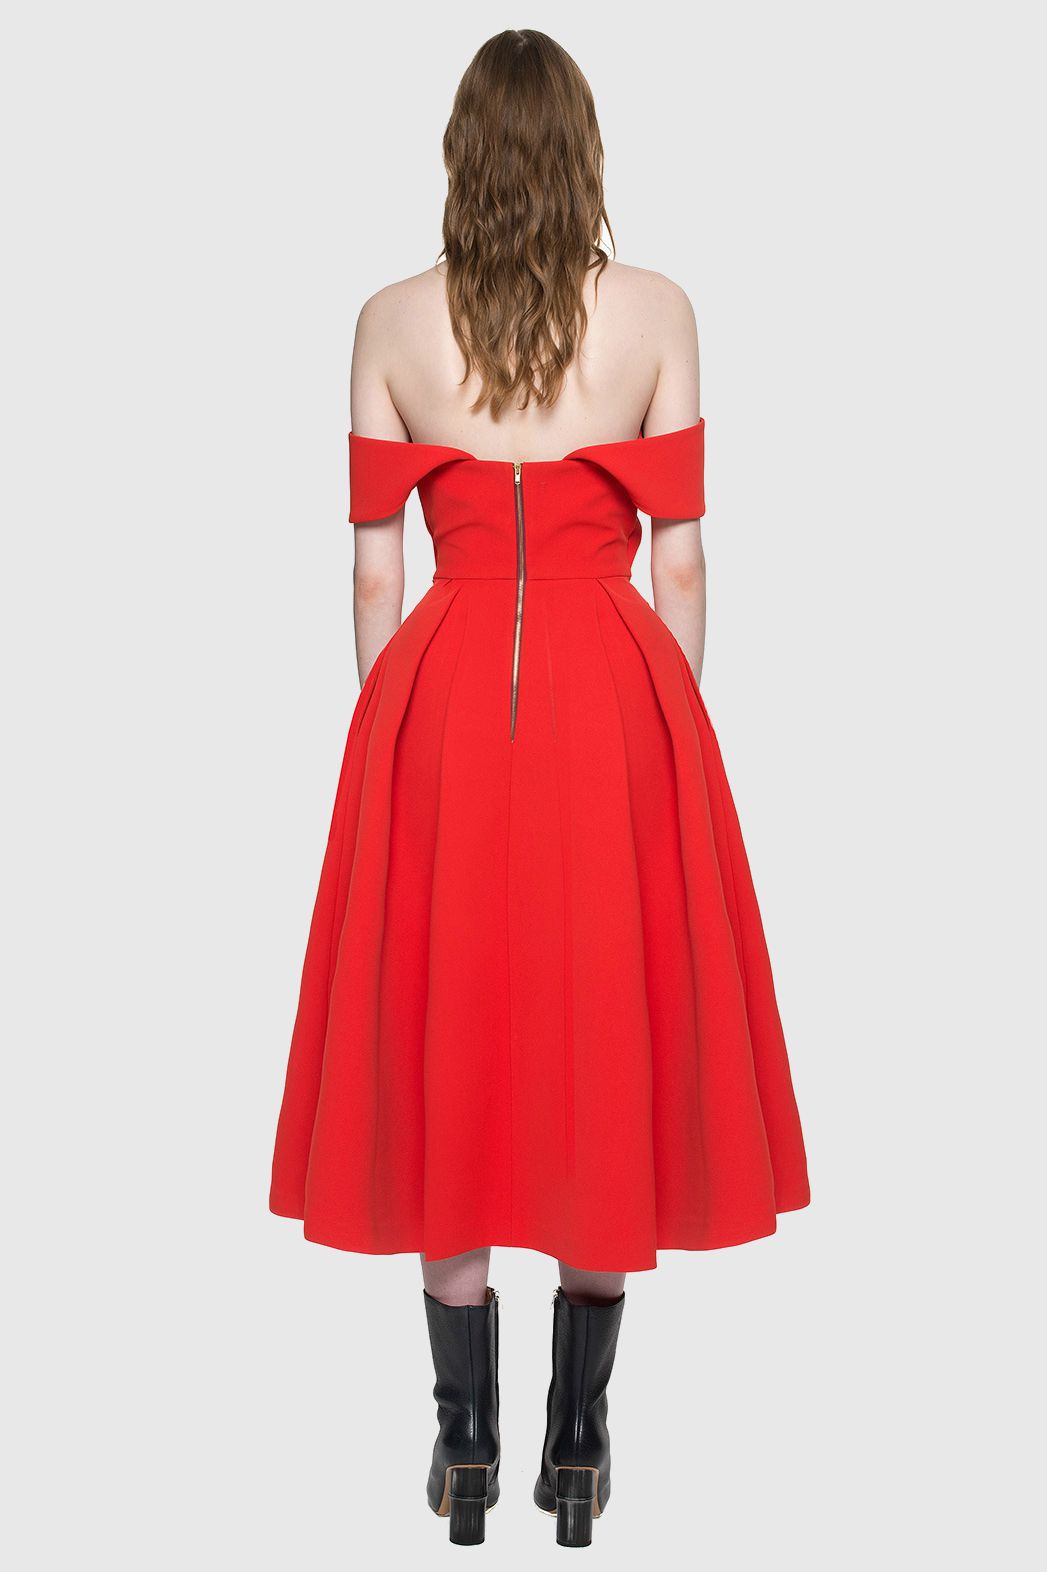 The back view of a red midi dress